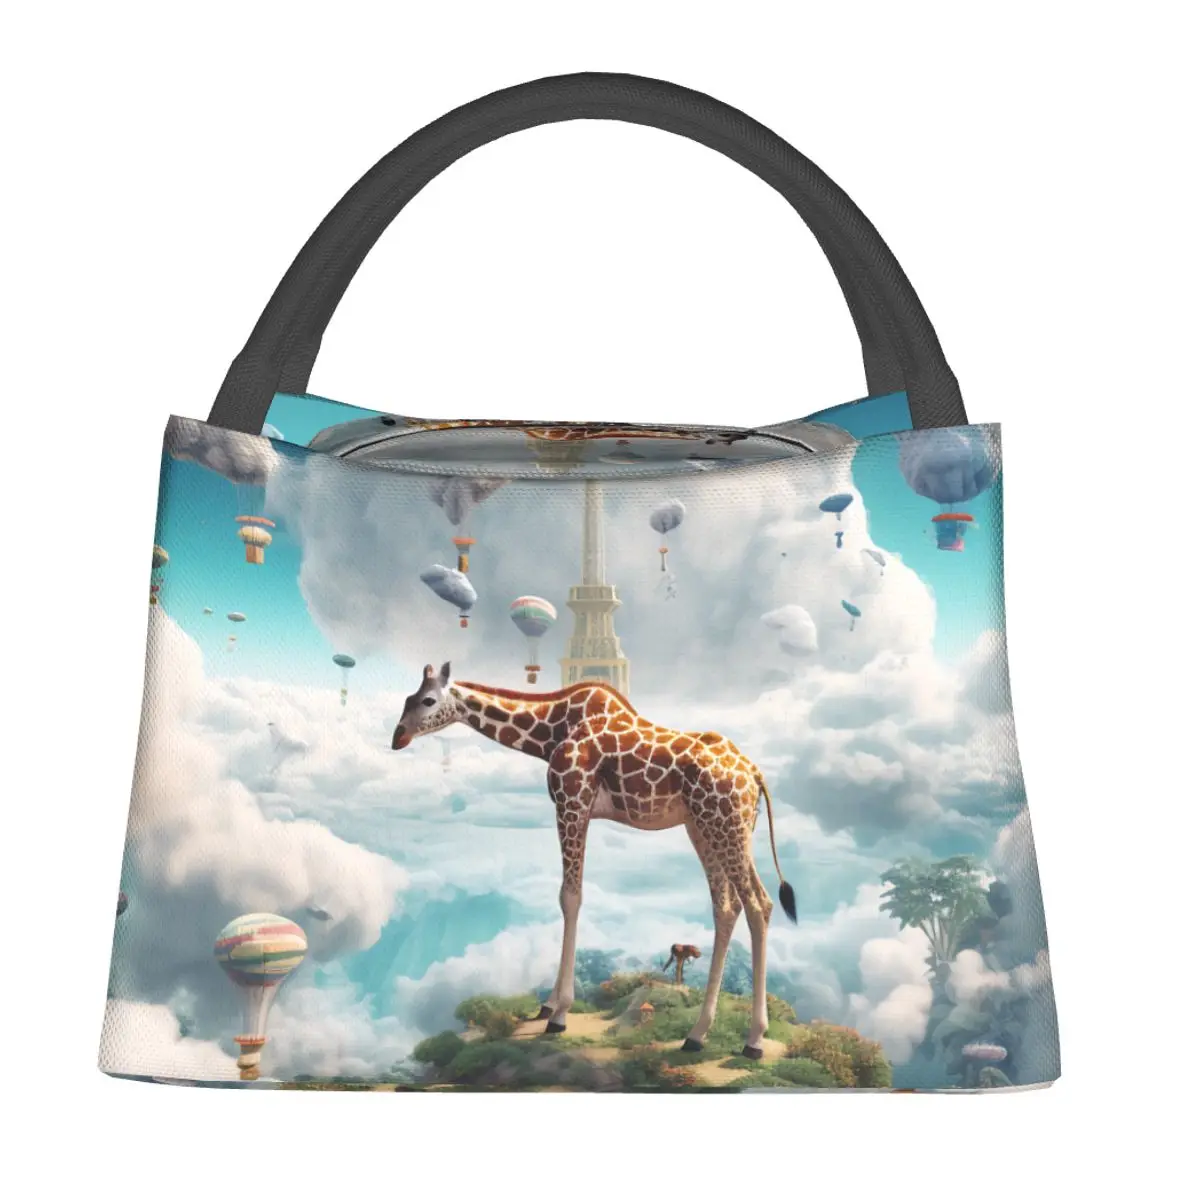 

Giraffe Lunch Bag 3D Animal Casual Lunch Box Picnic Convenient Thermal Lunch Bags For Women Oxford Print Cooler Bag